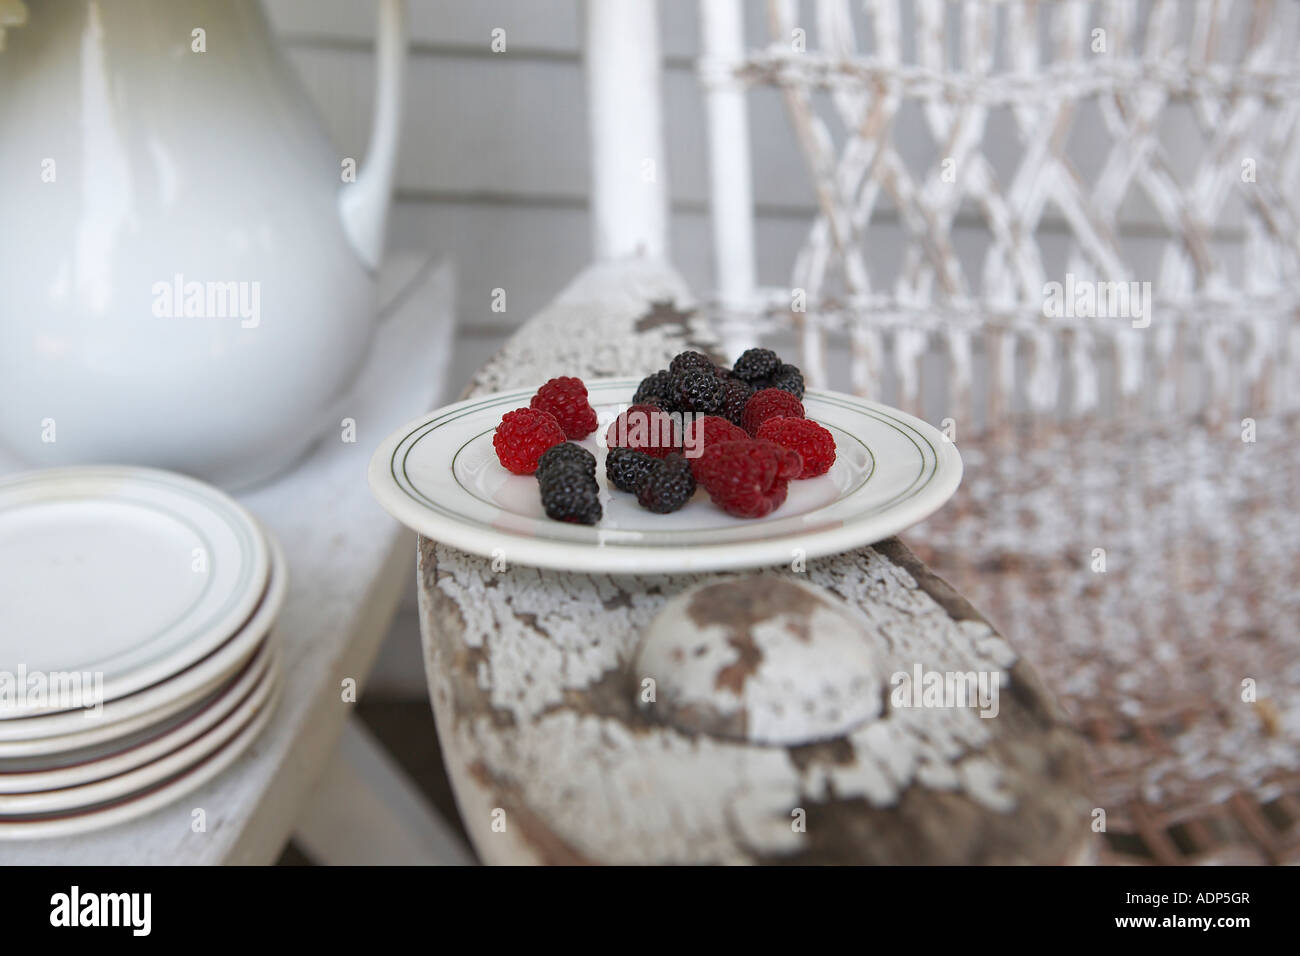 Plate of red and black raspberries set on the arm of an old rocking chair on the front porch Stock Photo